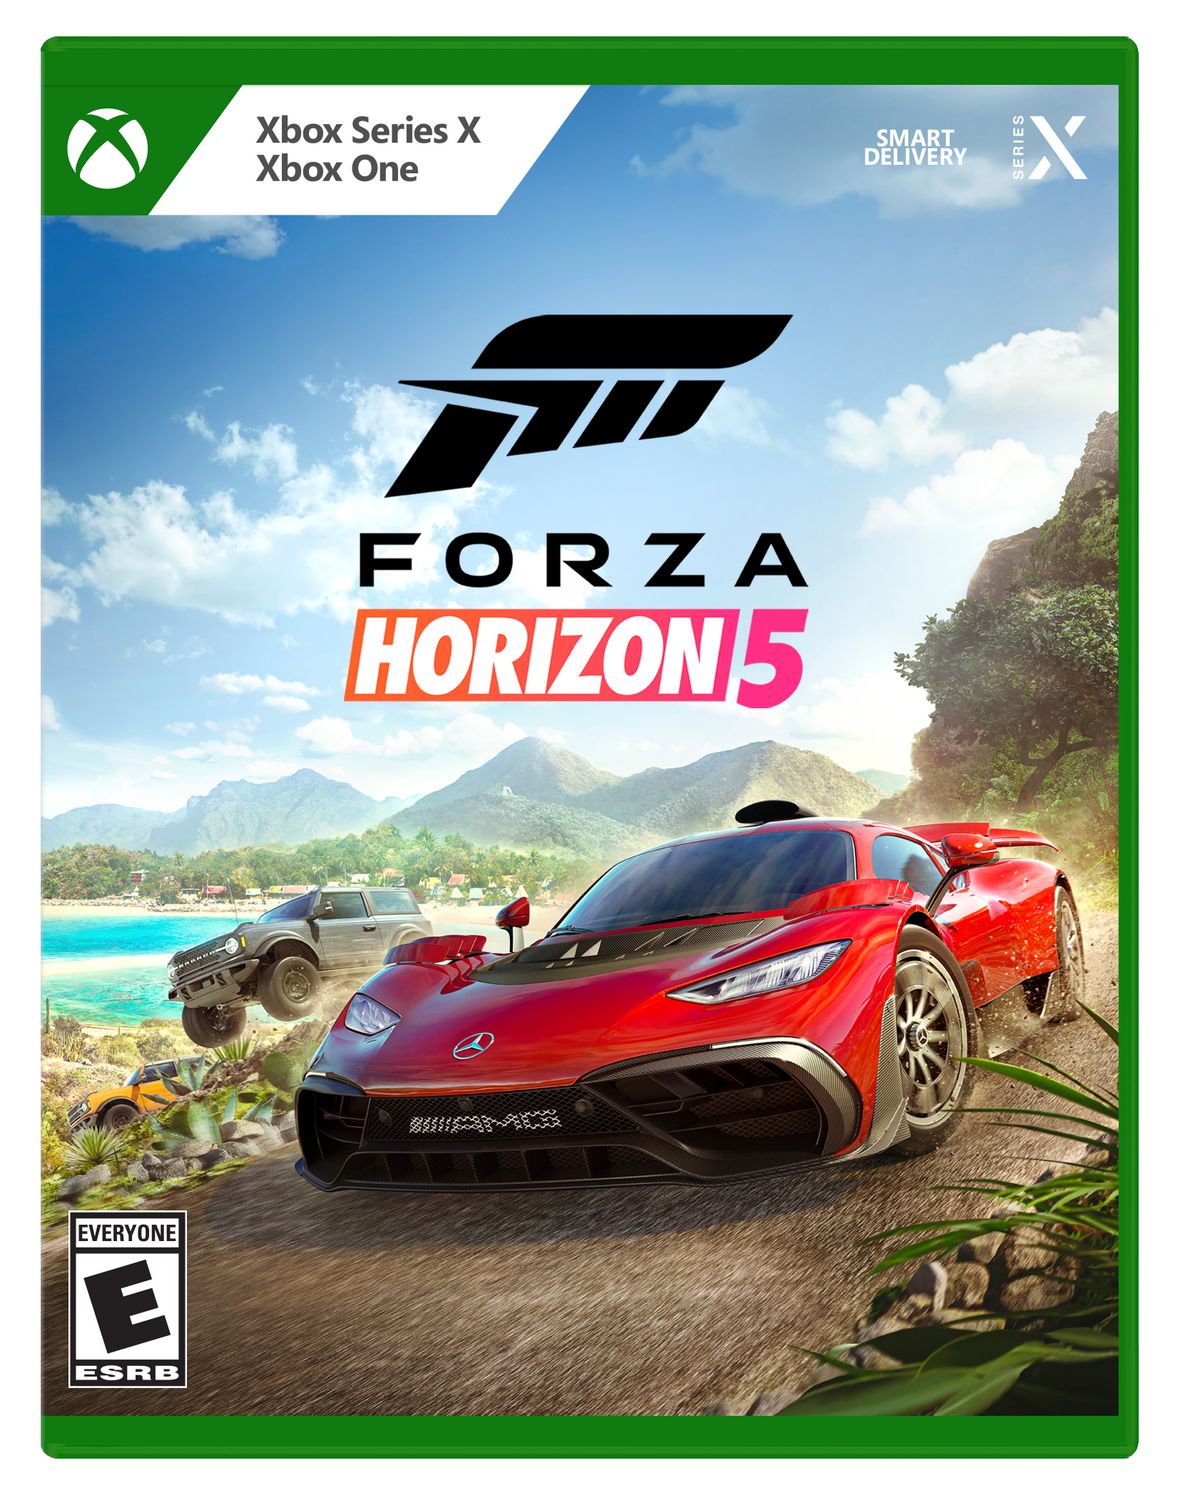 Buy Key Forza Horizon 3 Standard Edition Xbox cheap, choose from different  sellers with different payment methods. Instant delivery.